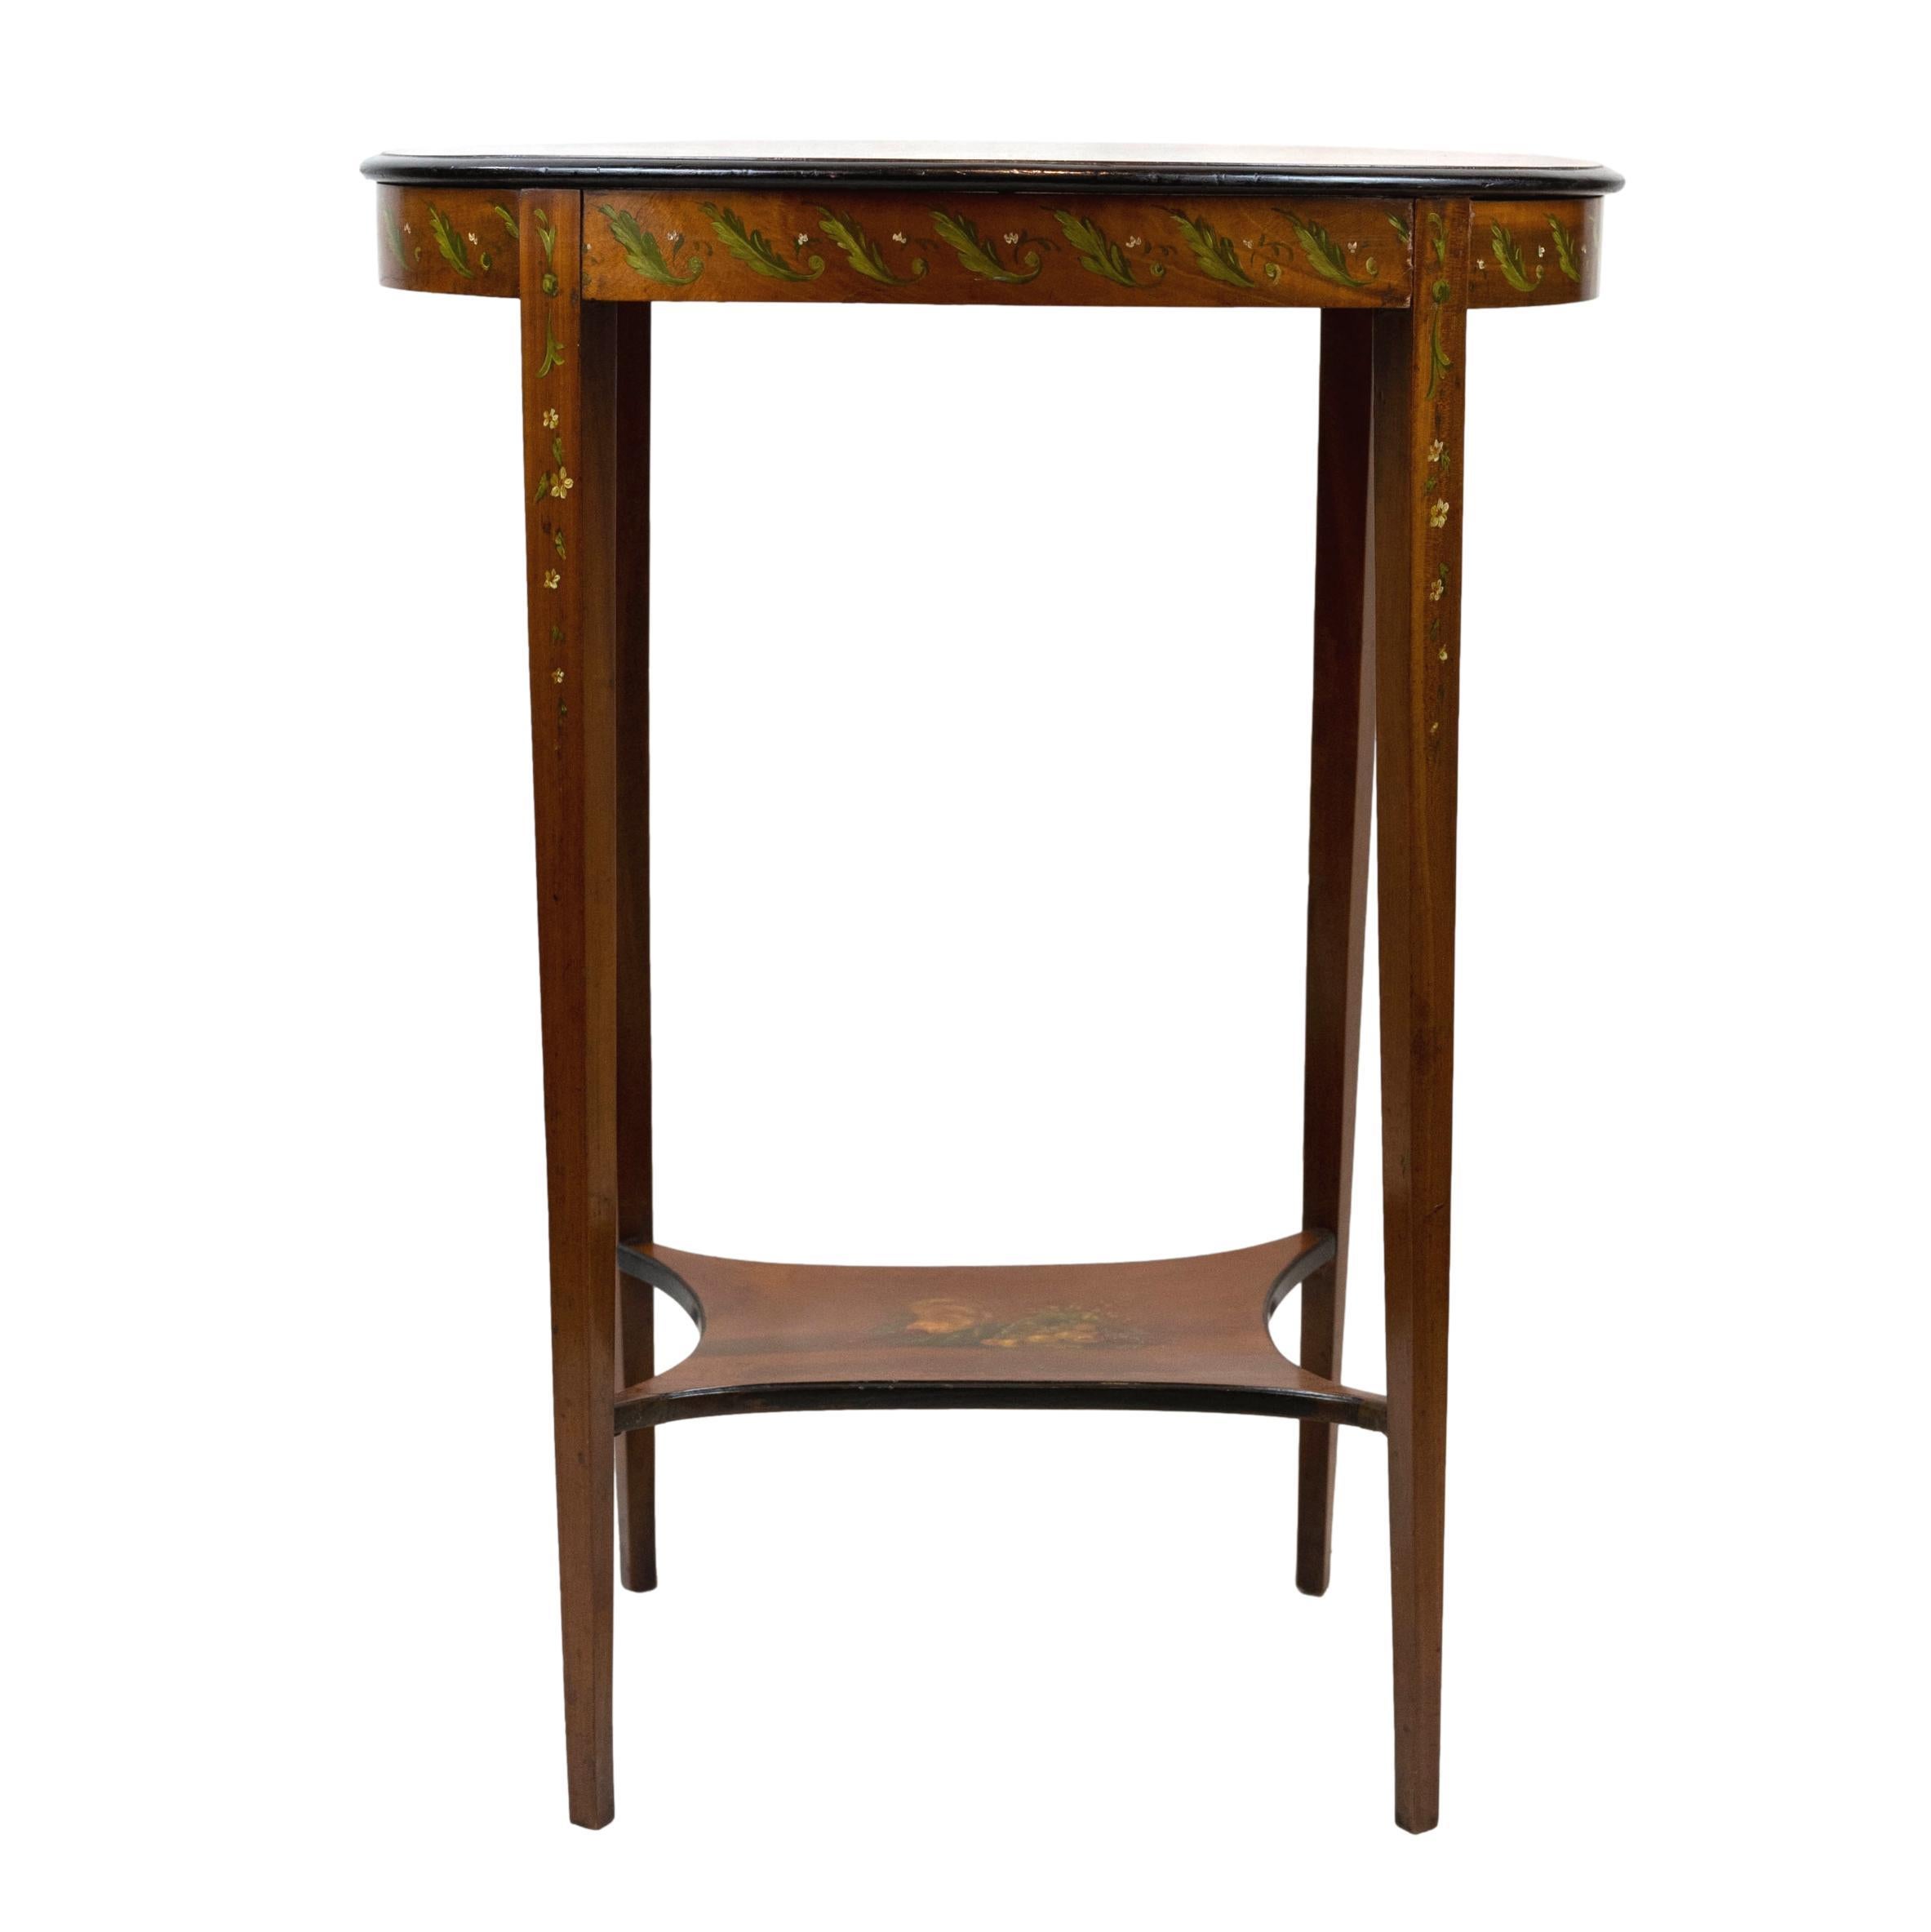 Edwardian Painted Satinwood Two-Tier Occasional Table, English, ca. 1900 For Sale 1